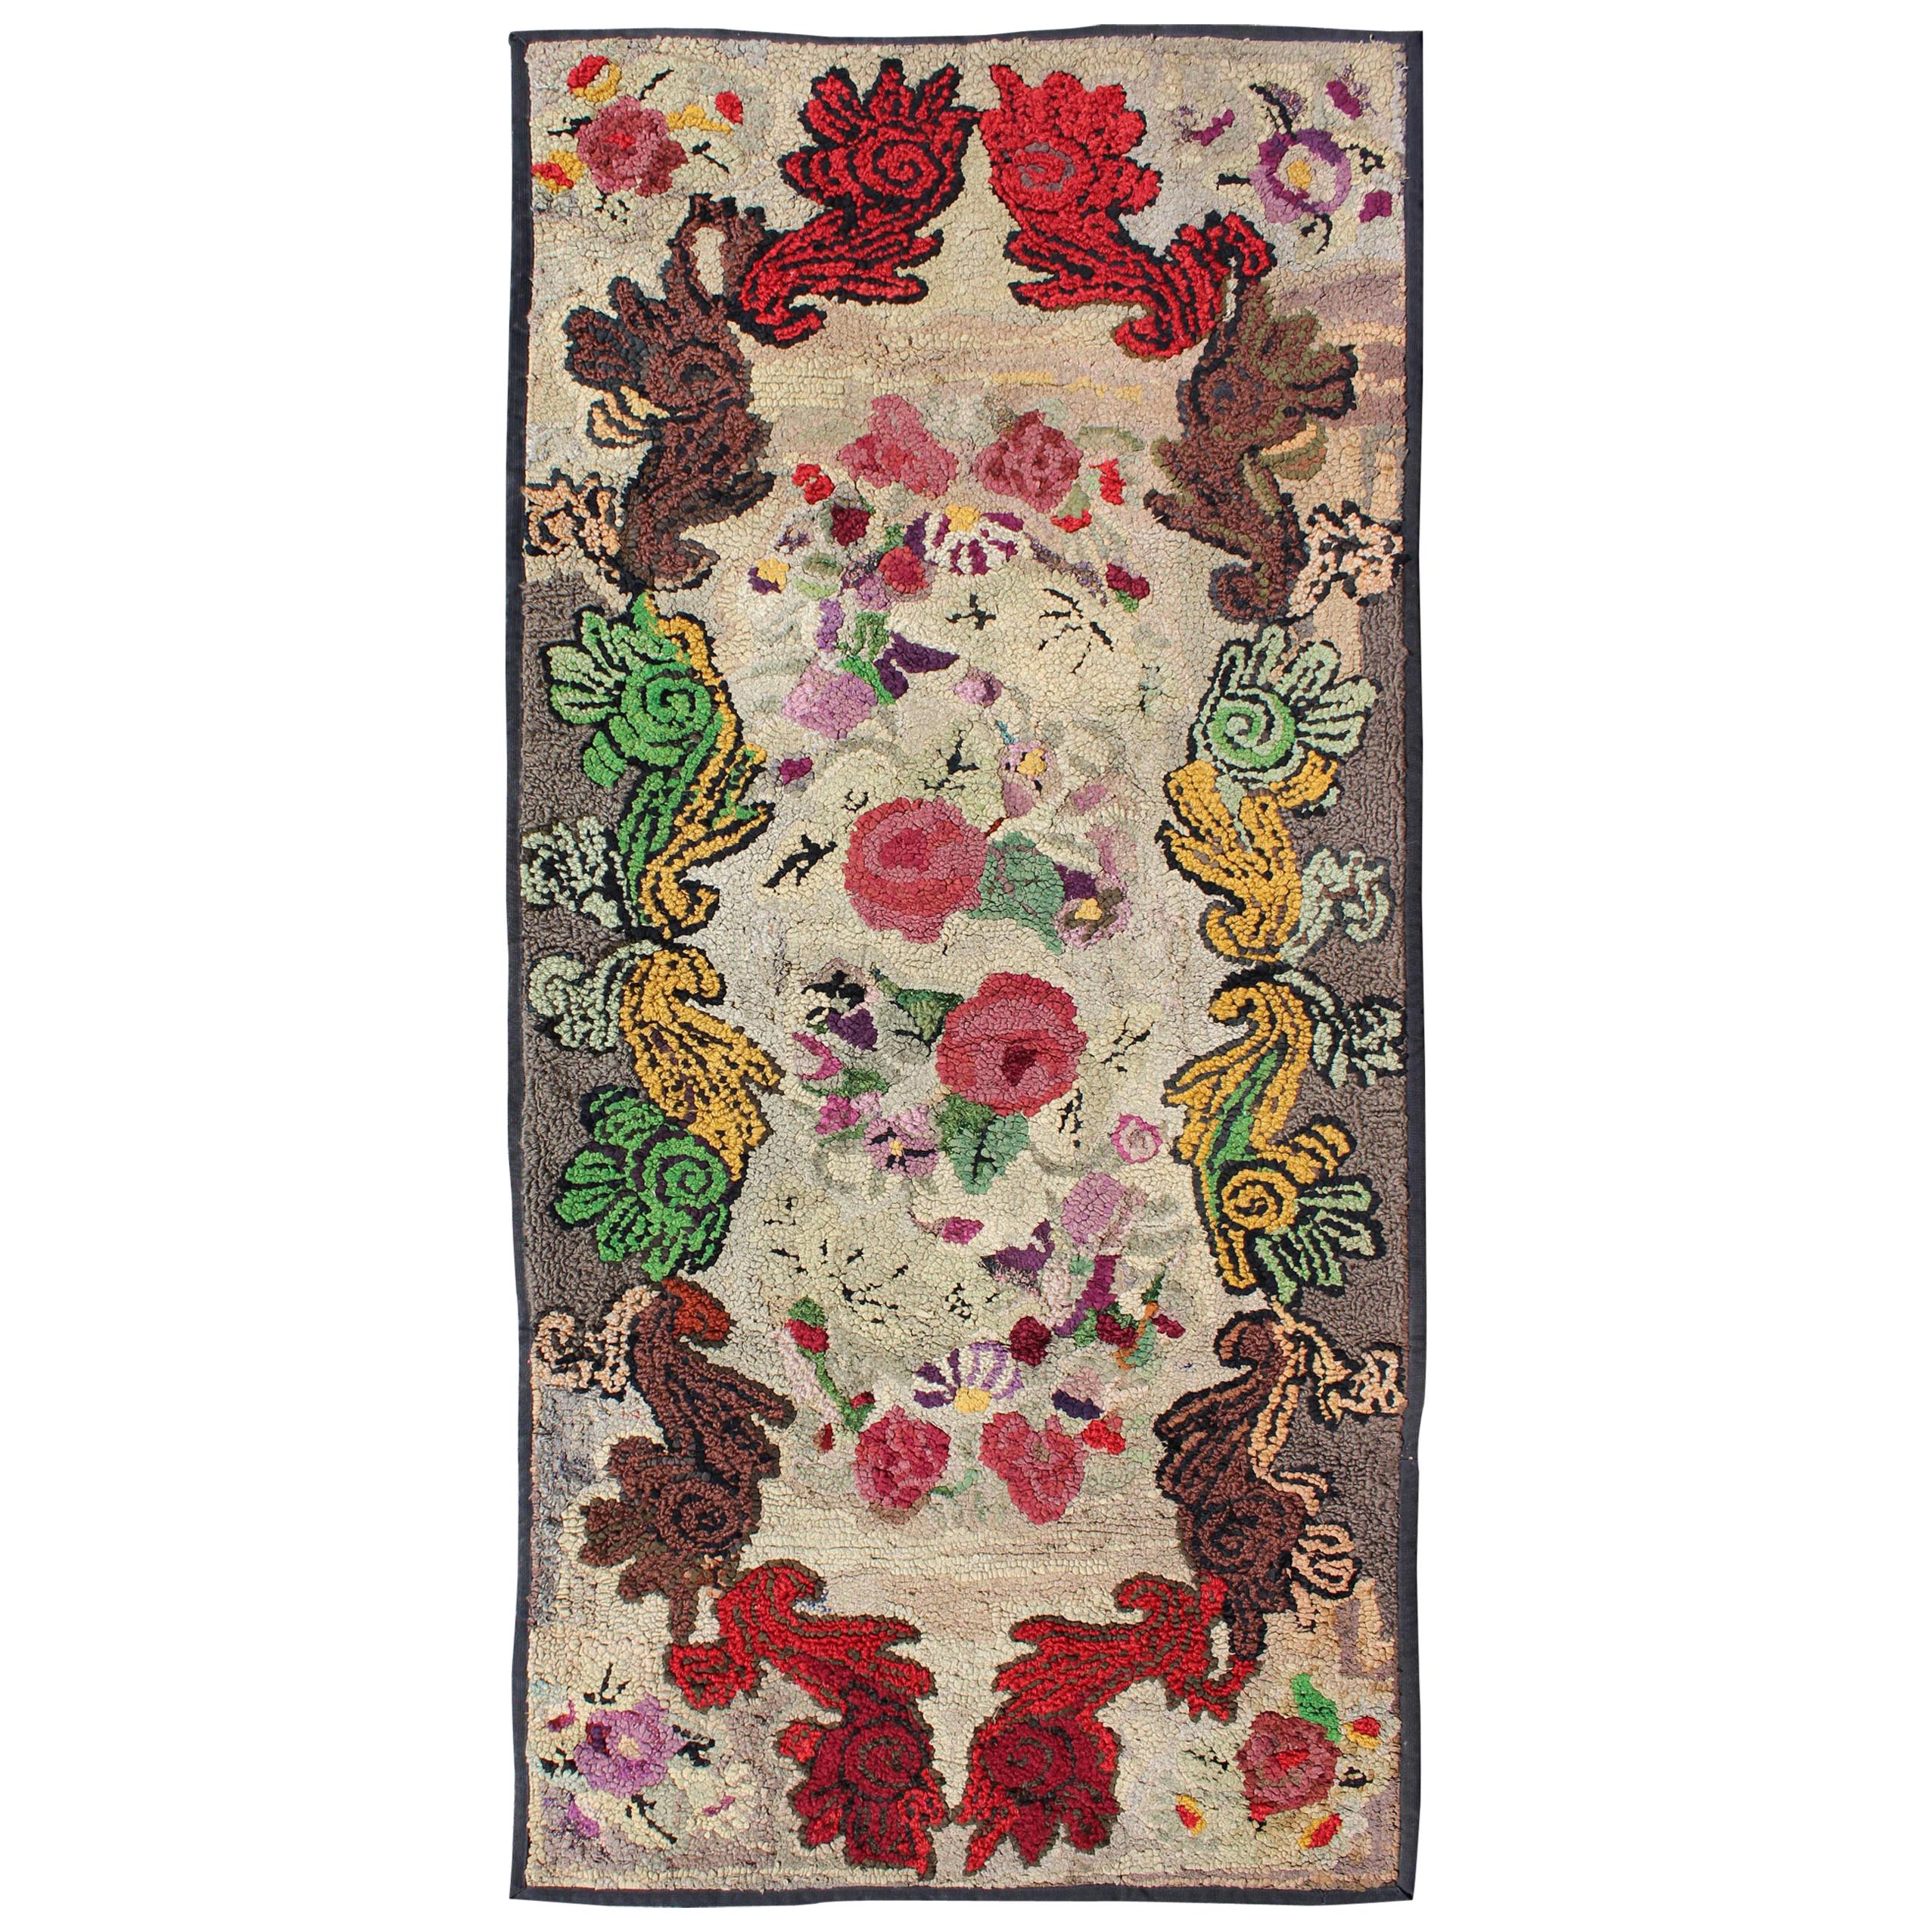 Antique American Hooked Floral Rug with Beautiful Colors Red, Green, Yellow